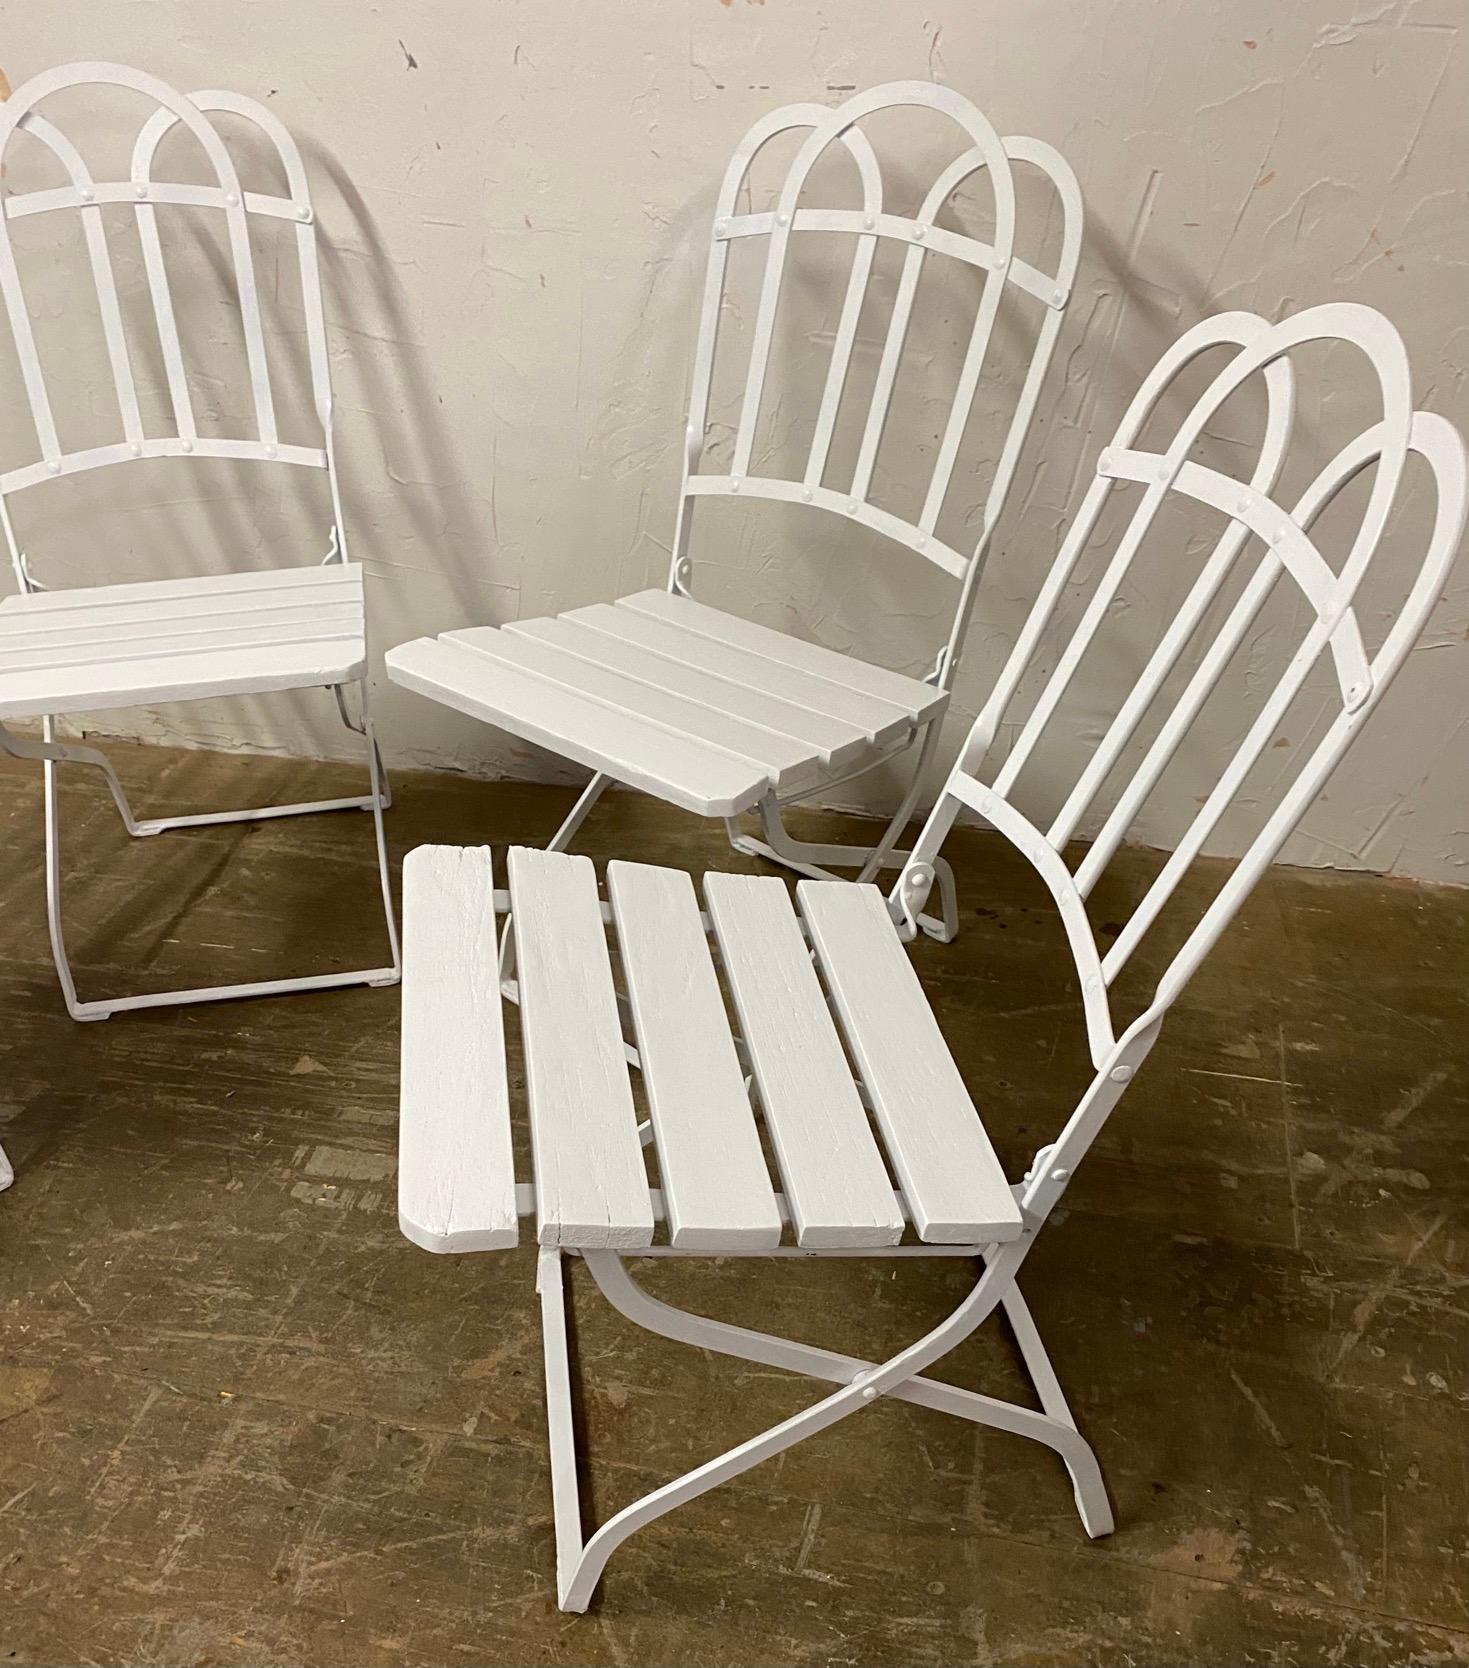 Say it with style with this set of 4 antique French folding bistro style dining chairs. Leave them out or fold them up to save space. Great dining chairs for the porch, garden or patio.